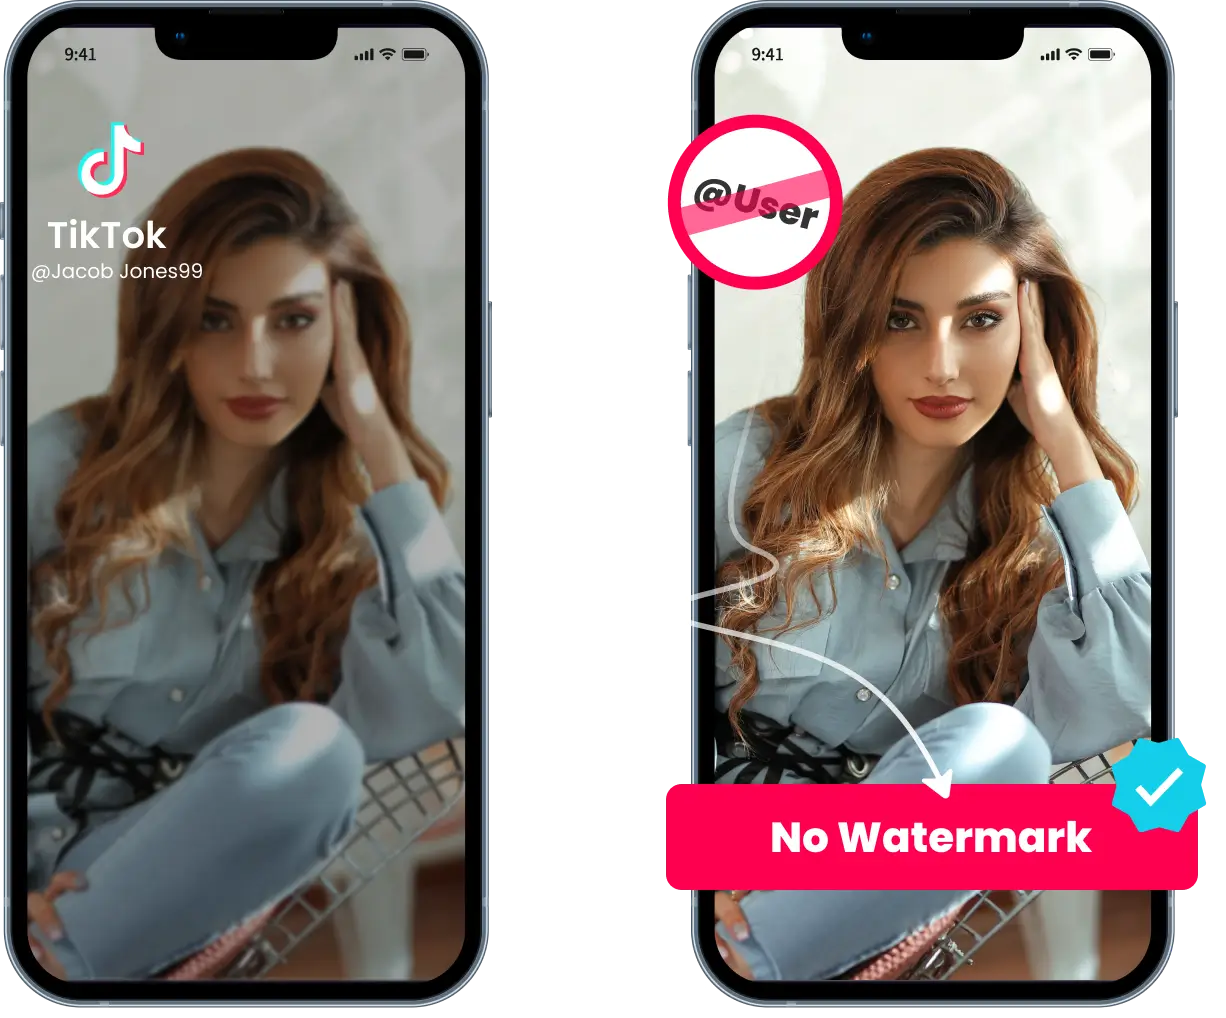 Comparison between with and without watermark